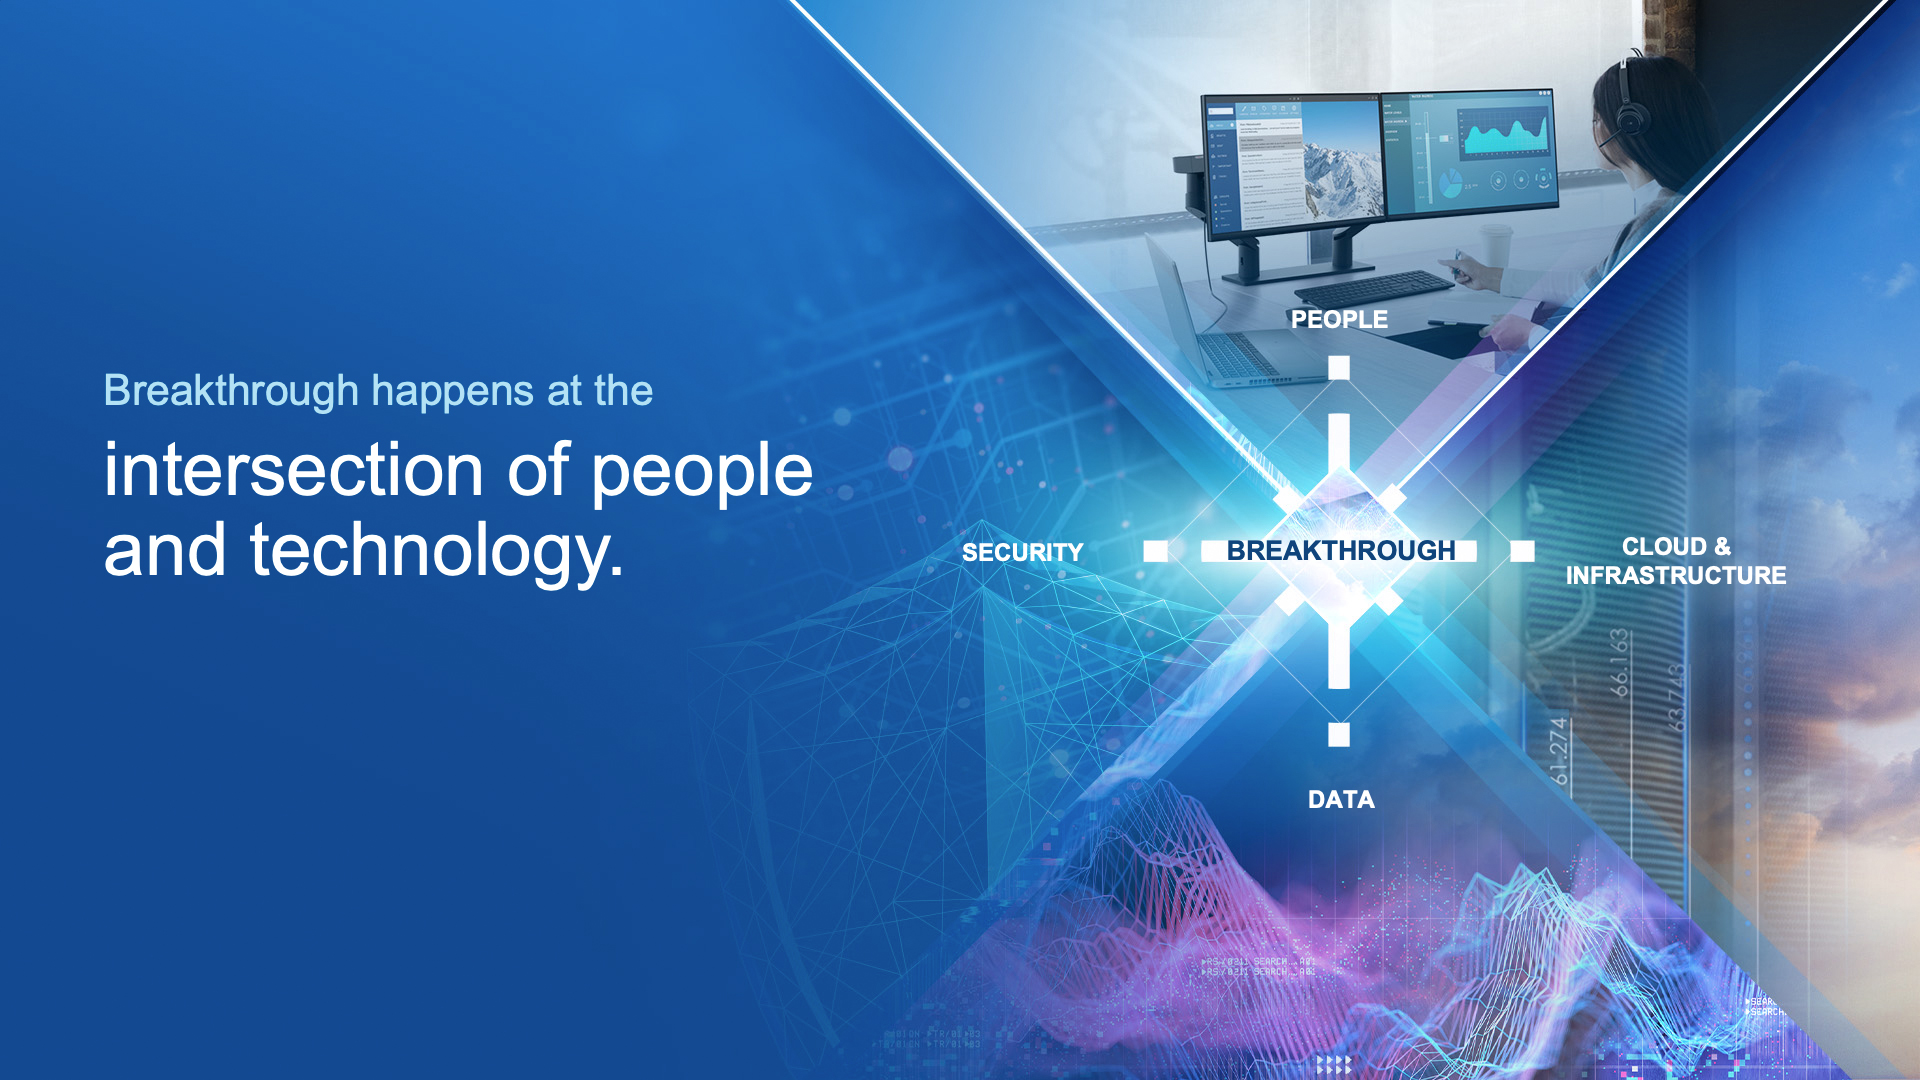 An image that depicts a presentation slide design of the four core areas that create the intersection of people and technology. Breakthrough sits at the intersection point.